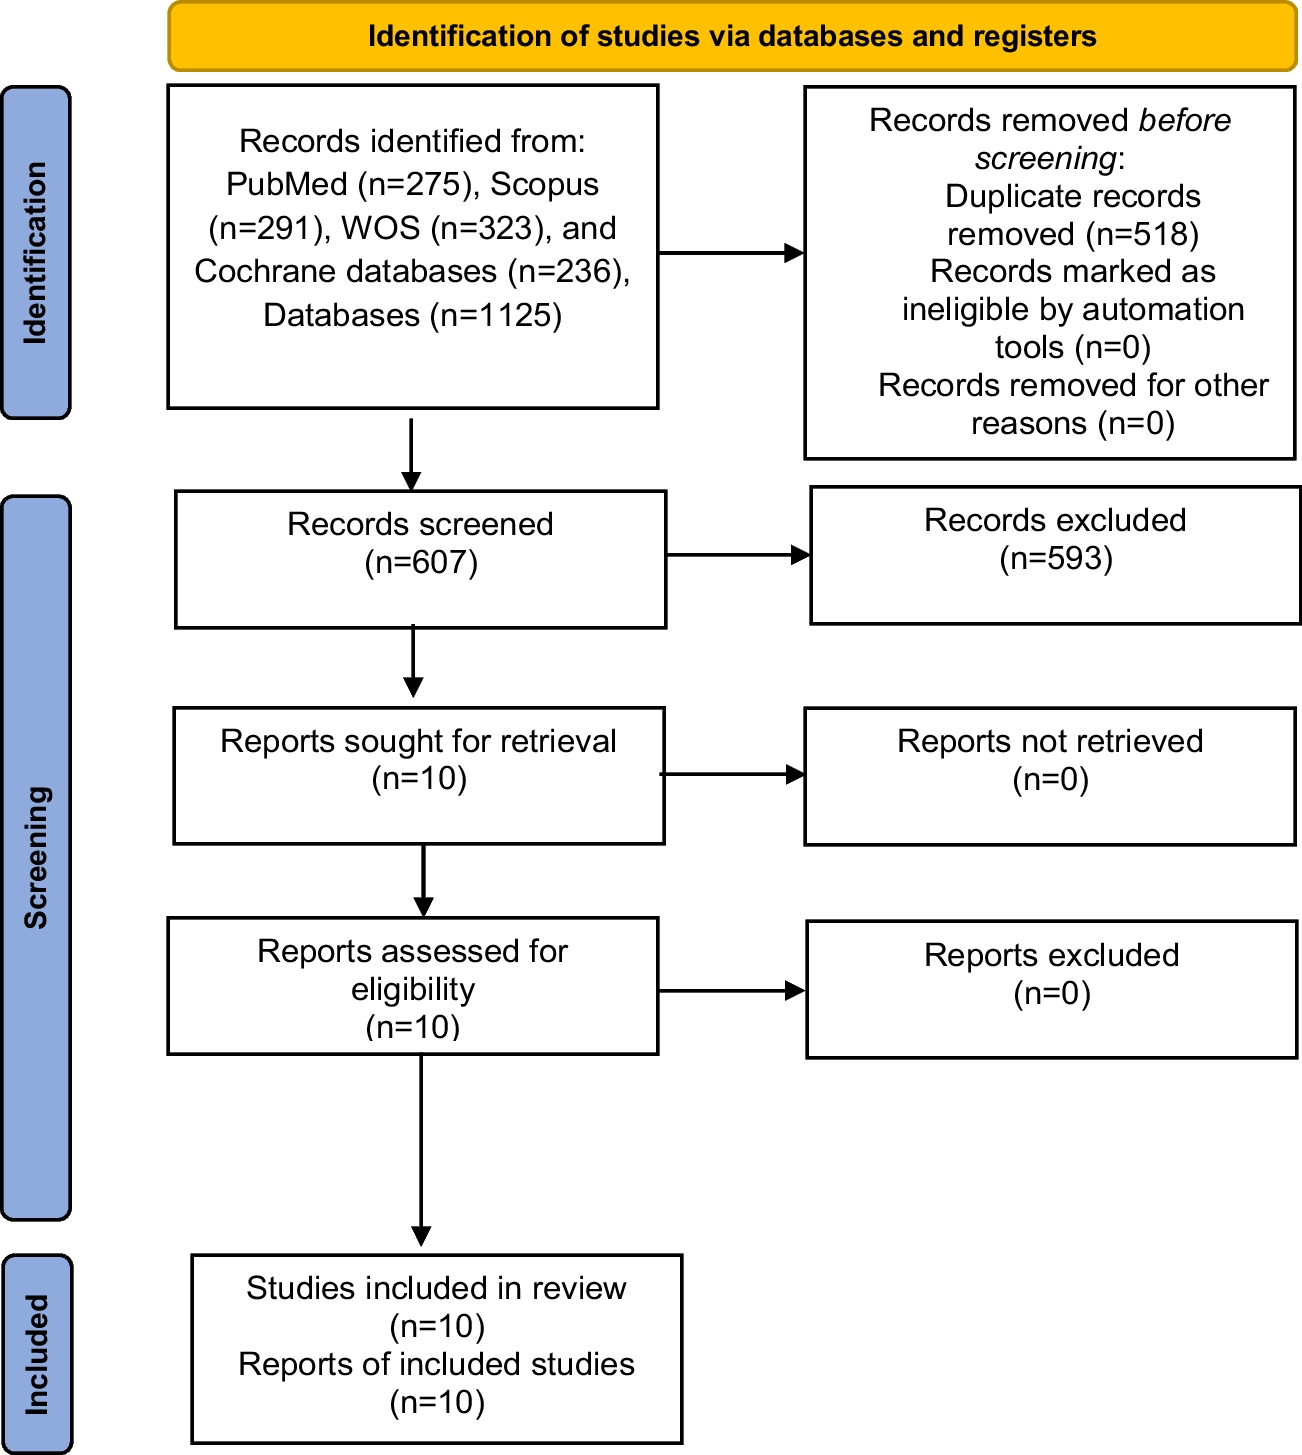 How Intravesical Platelet-Rich Plasma Can Help Patients with Interstitial Cystitis/Bladder Pain Syndrome: A Comprehensive Scoping Review